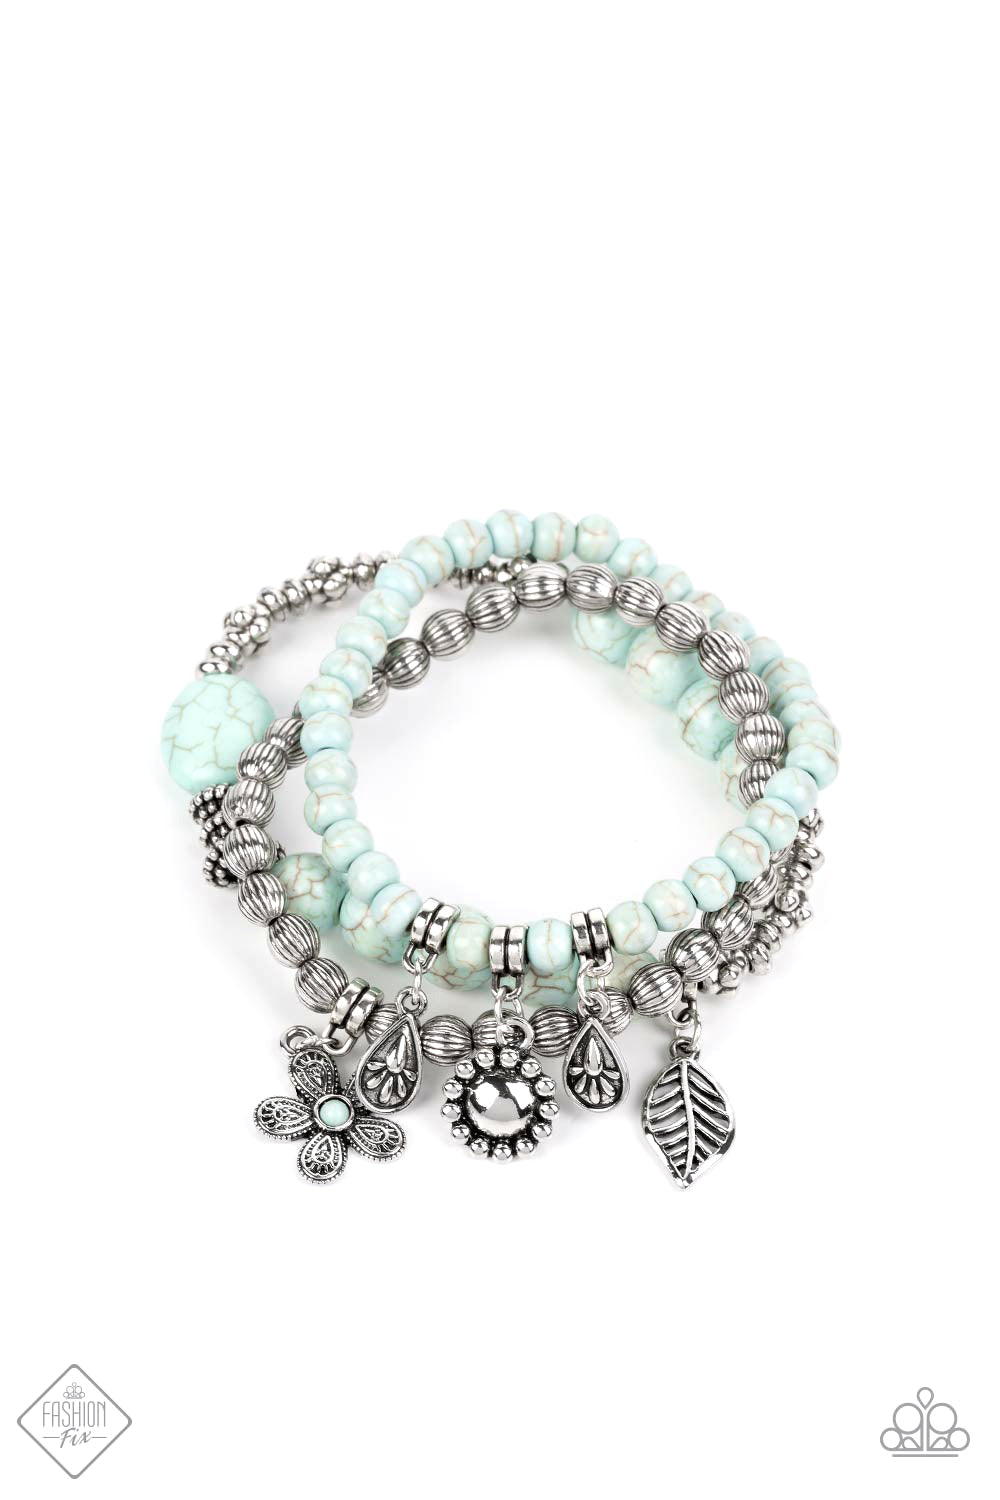 Individual Inflorescence - Blue and Silver Floral Charm Bracelet - Paparazzi Accessories - A trio of floral-inspired bracelets, featuring comfortable stretchy bands and smooth light blue stones, stack along the wrist to create a bold statement piece. Sold as one set of three bracelets.